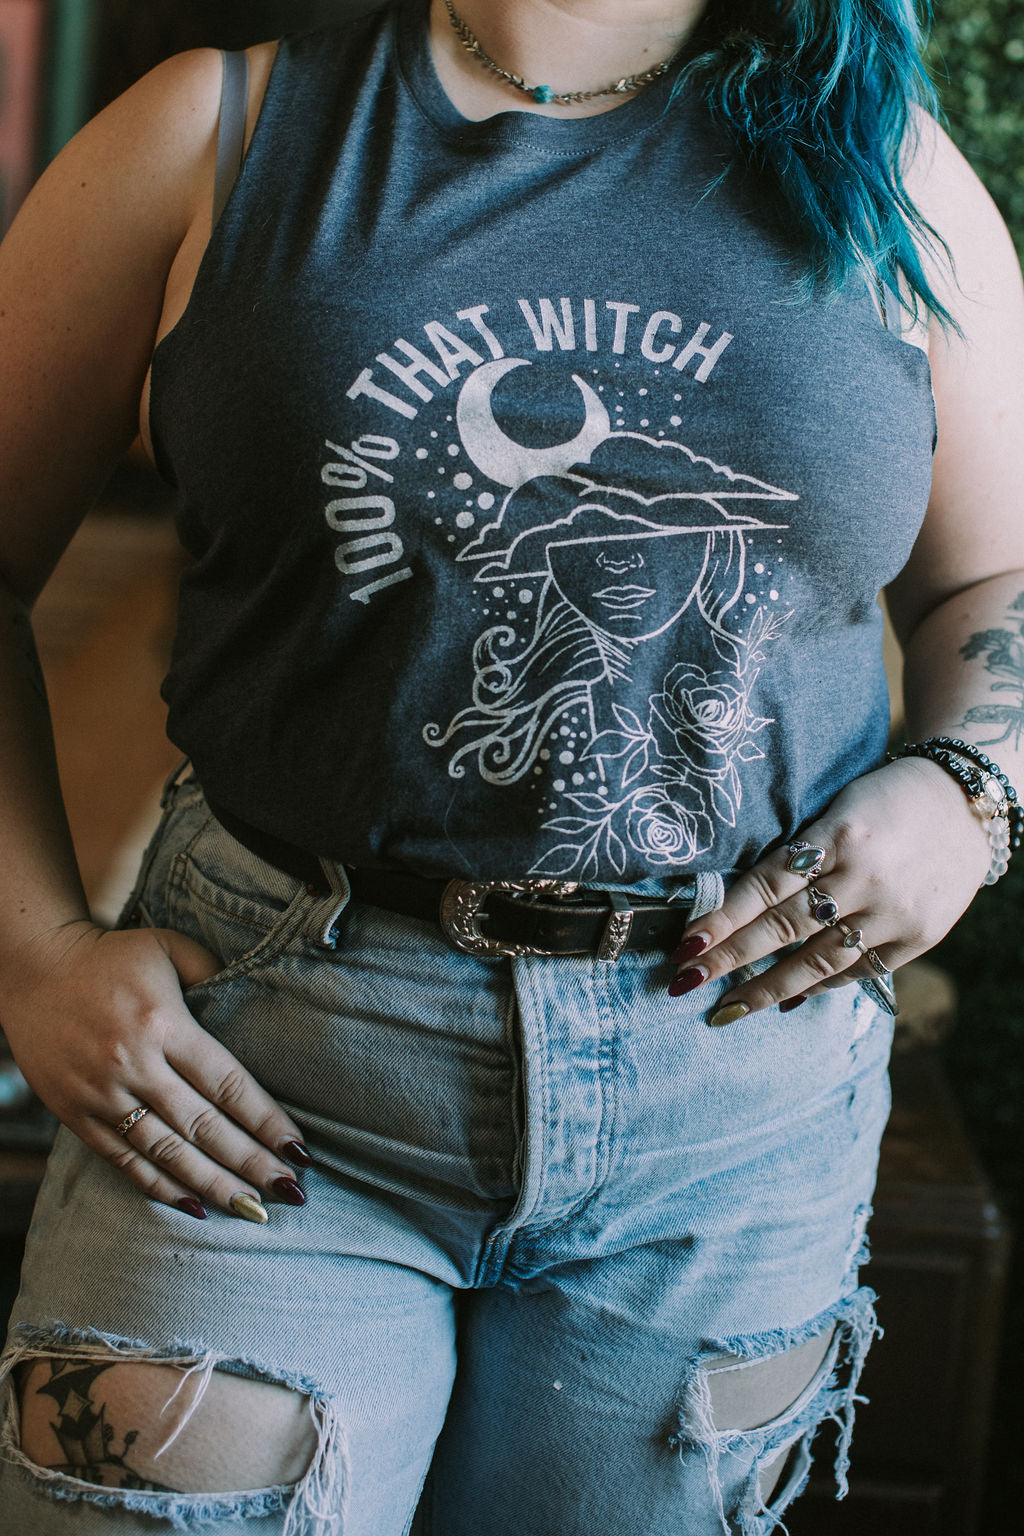 100% That Witch Tank Top